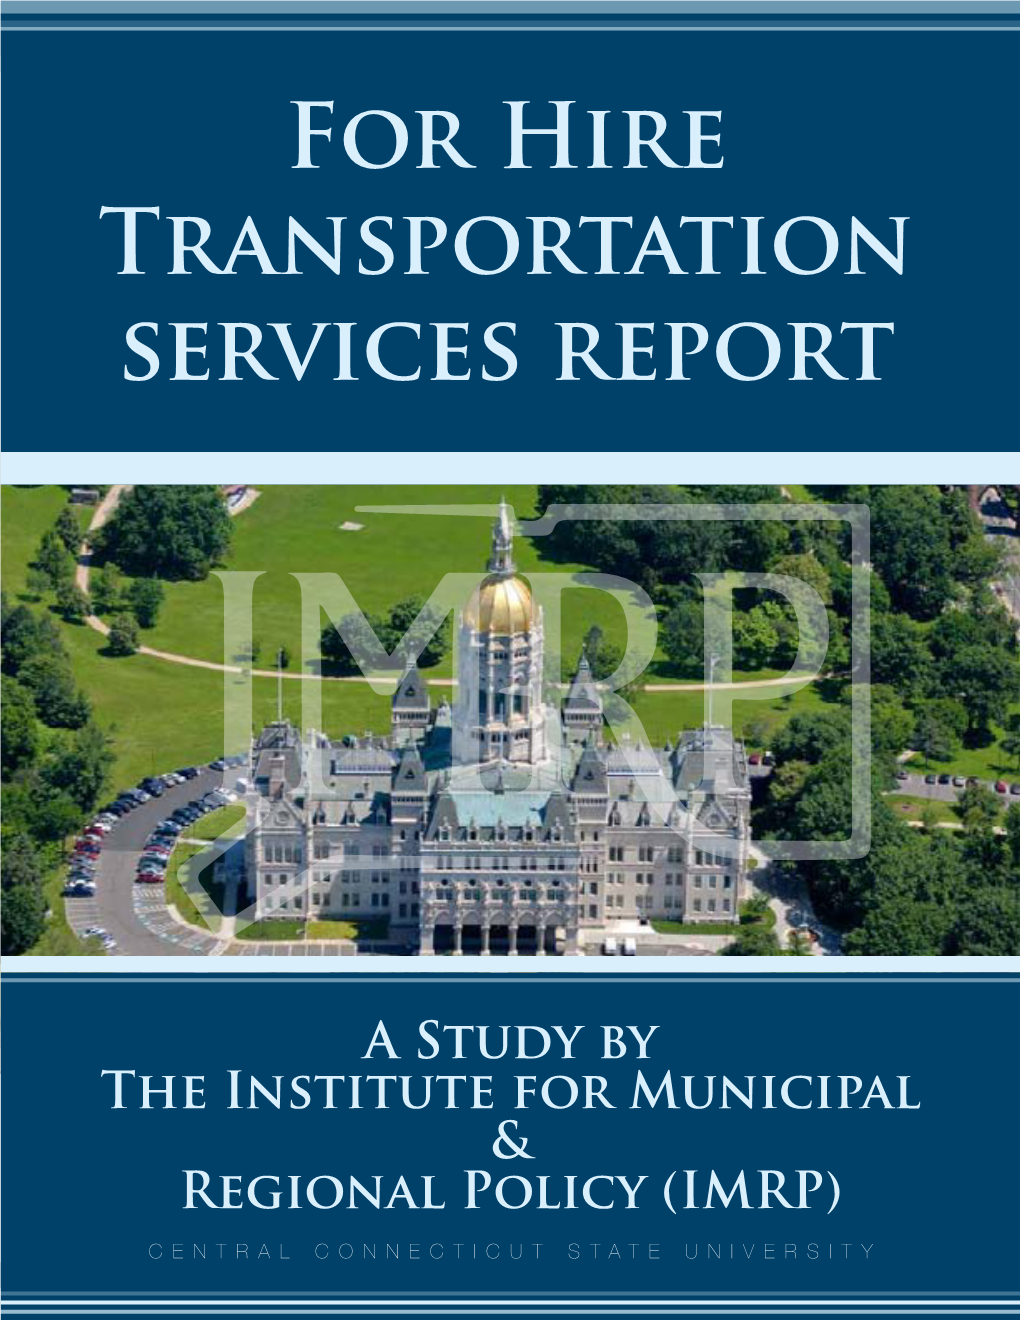 For Hire Transportation Services Report